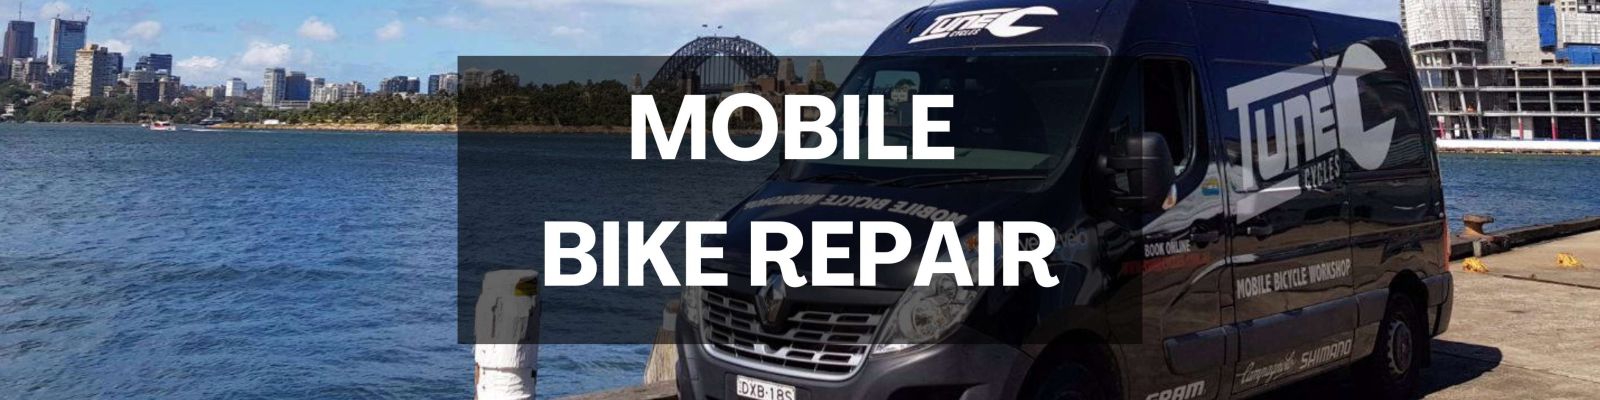 Mobile Bike Service and Repair in Sydney